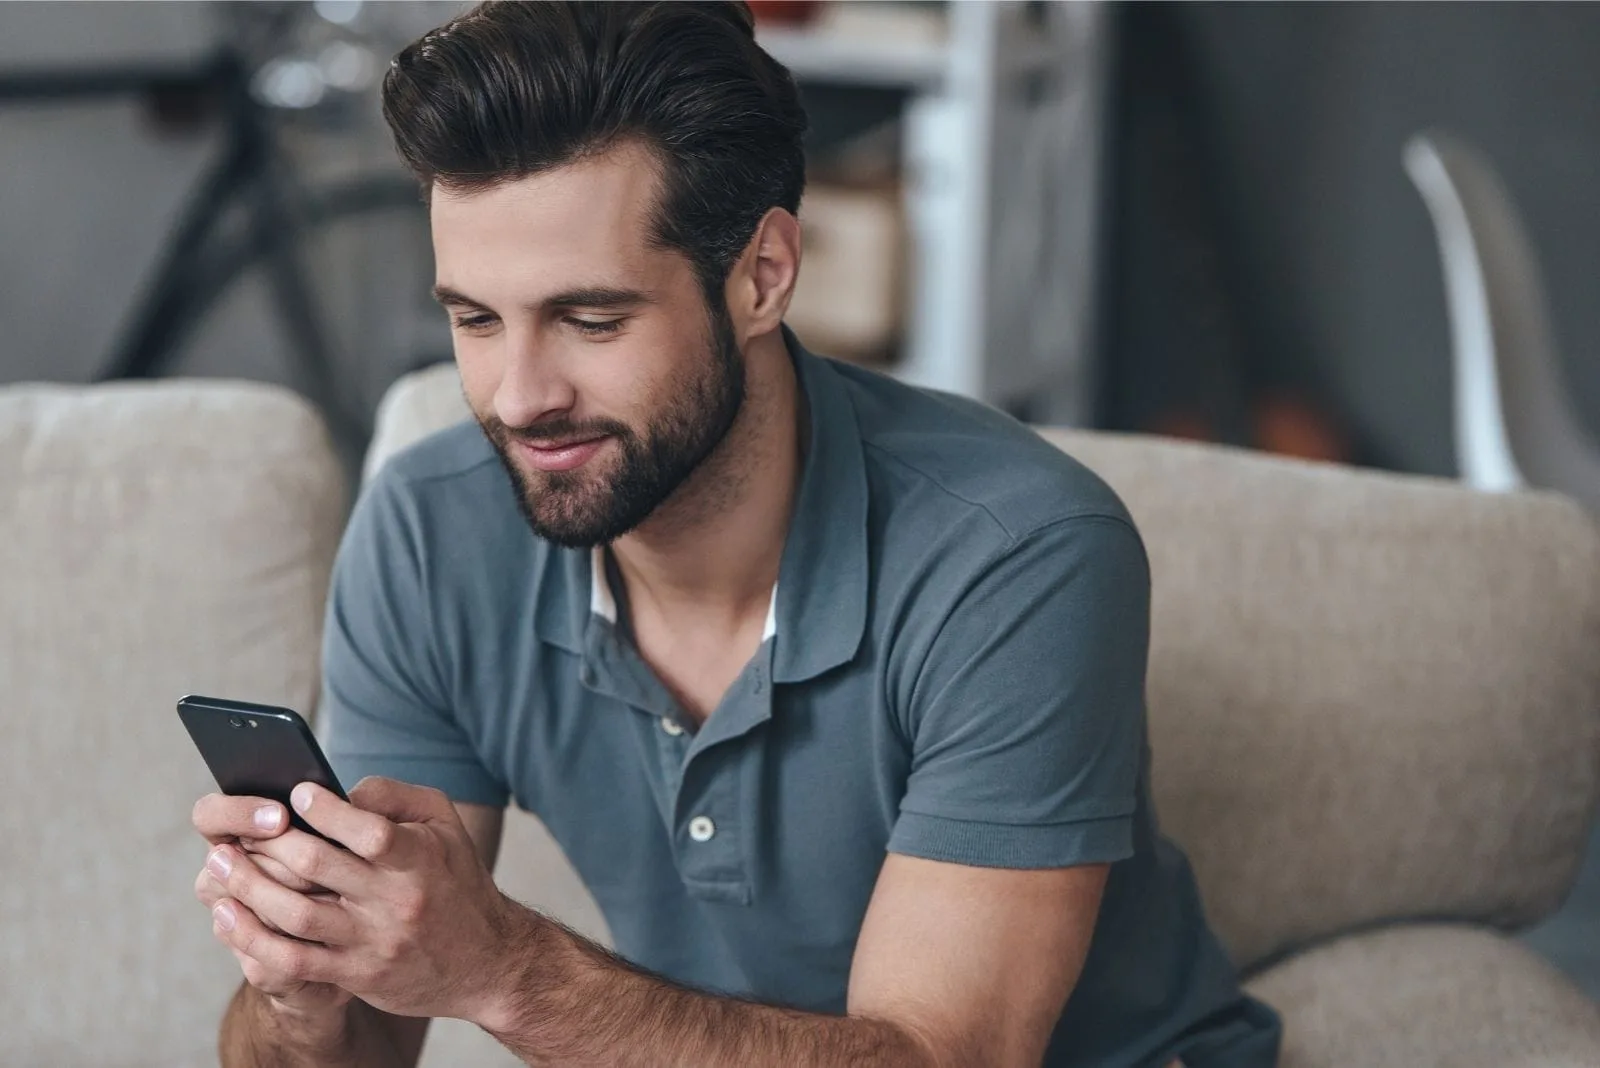 man smiling and texting while sitting in couch in casual shirt